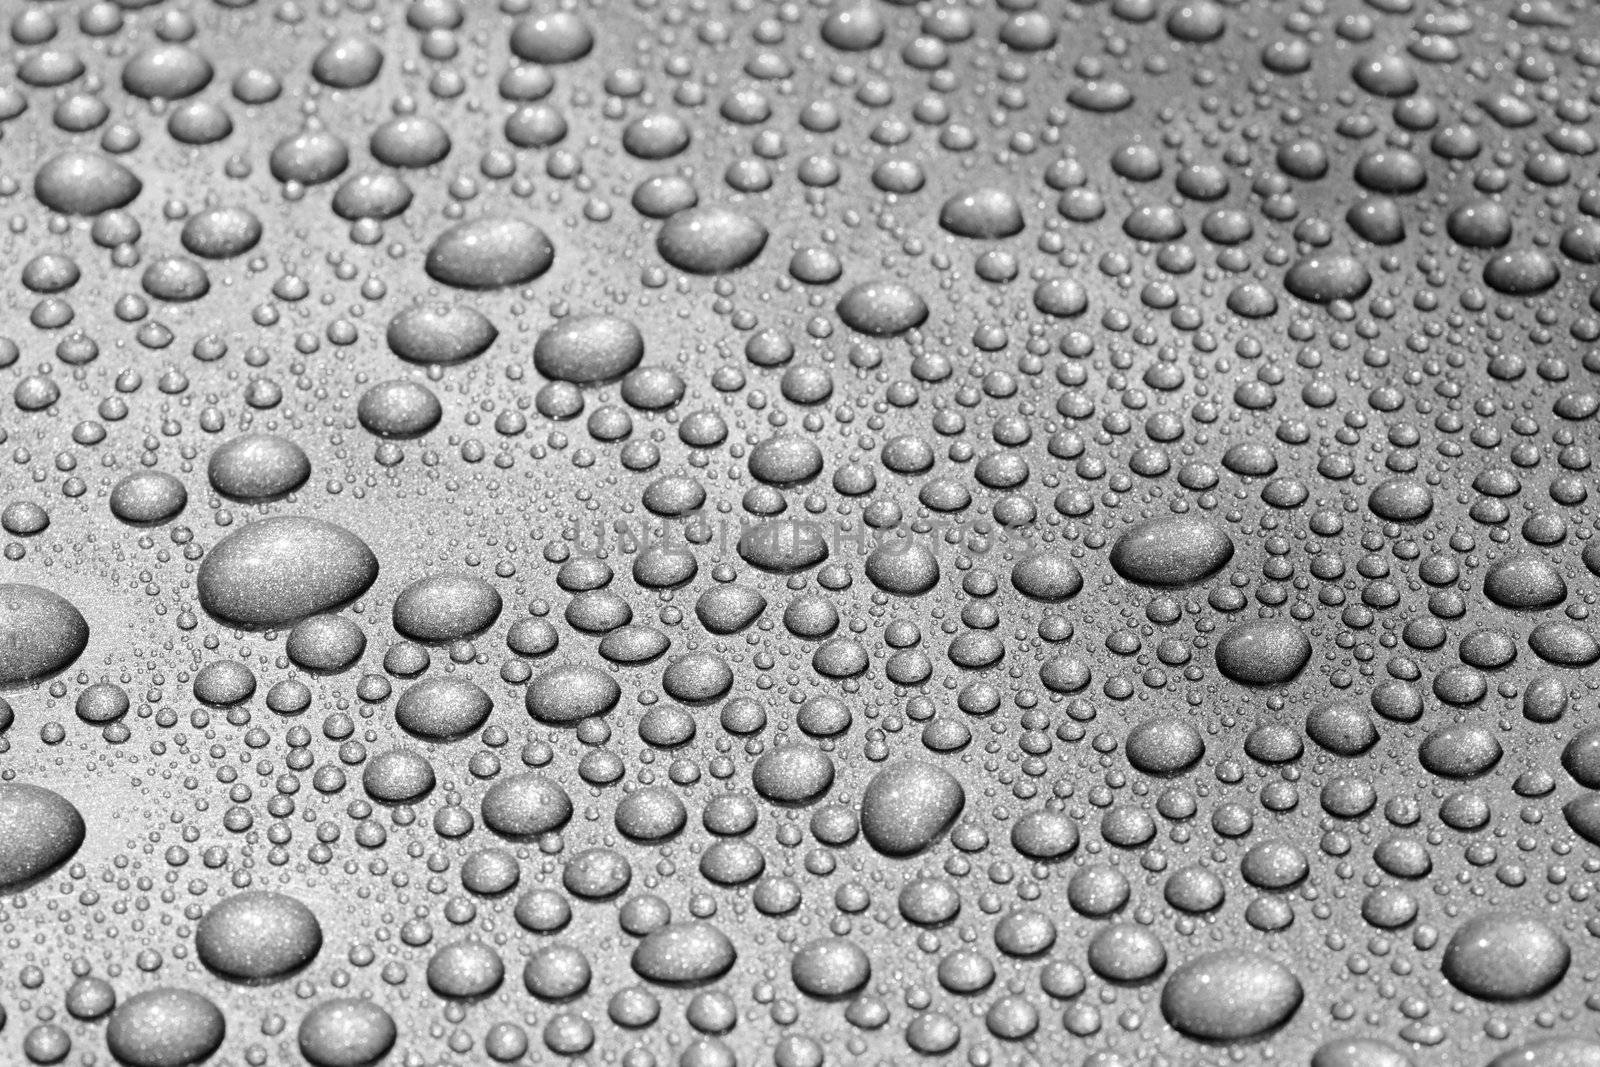 Water beads by Stocksnapper